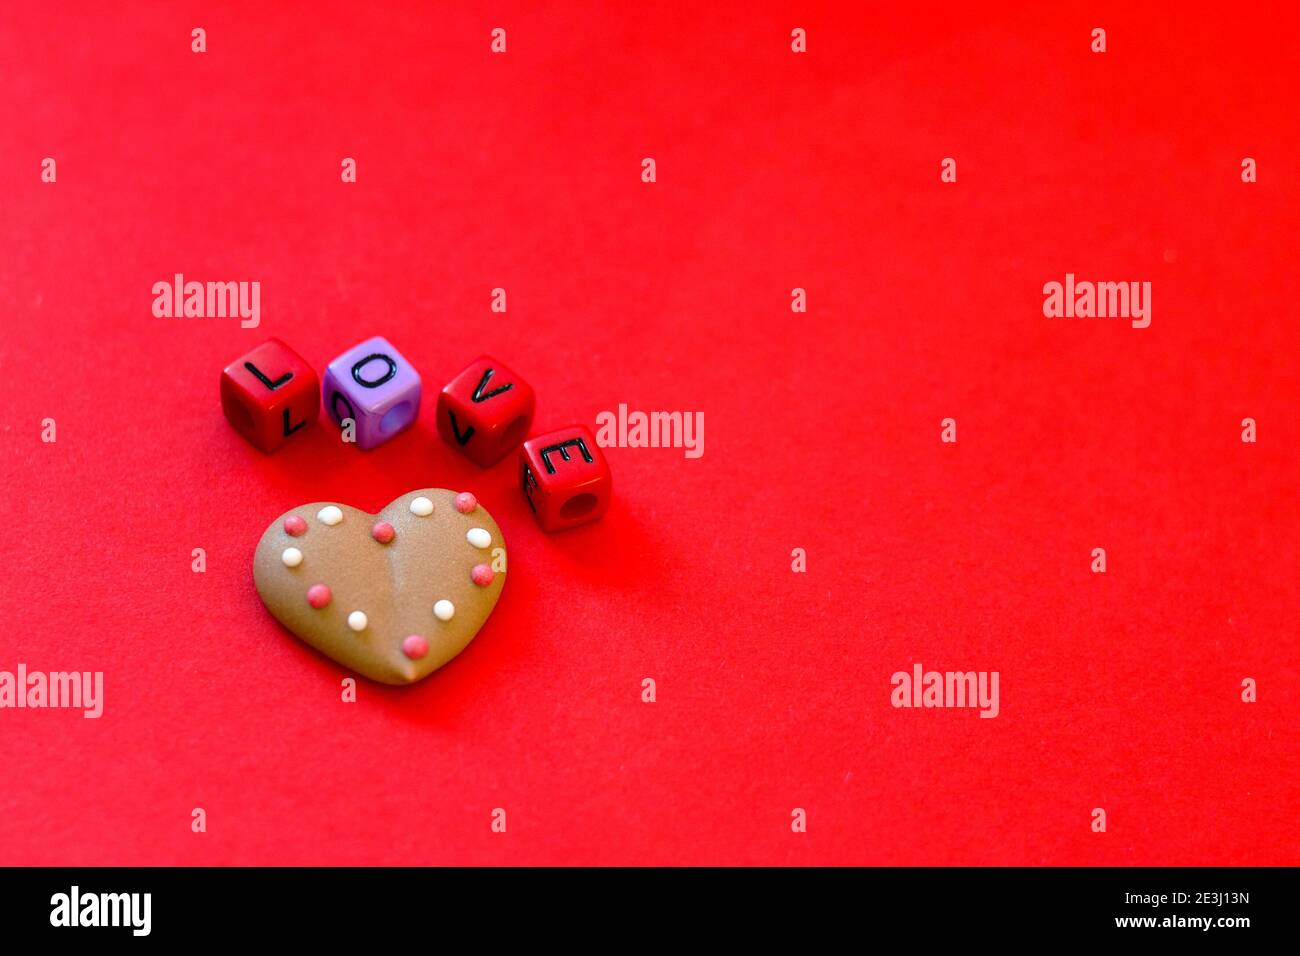 Festive red background. Heart shaped cookies. Colorful wooden cube beads with word 'love'.  Valentine's Day. 14 of February. Ideas of gifts. Flat lay, Stock Photo